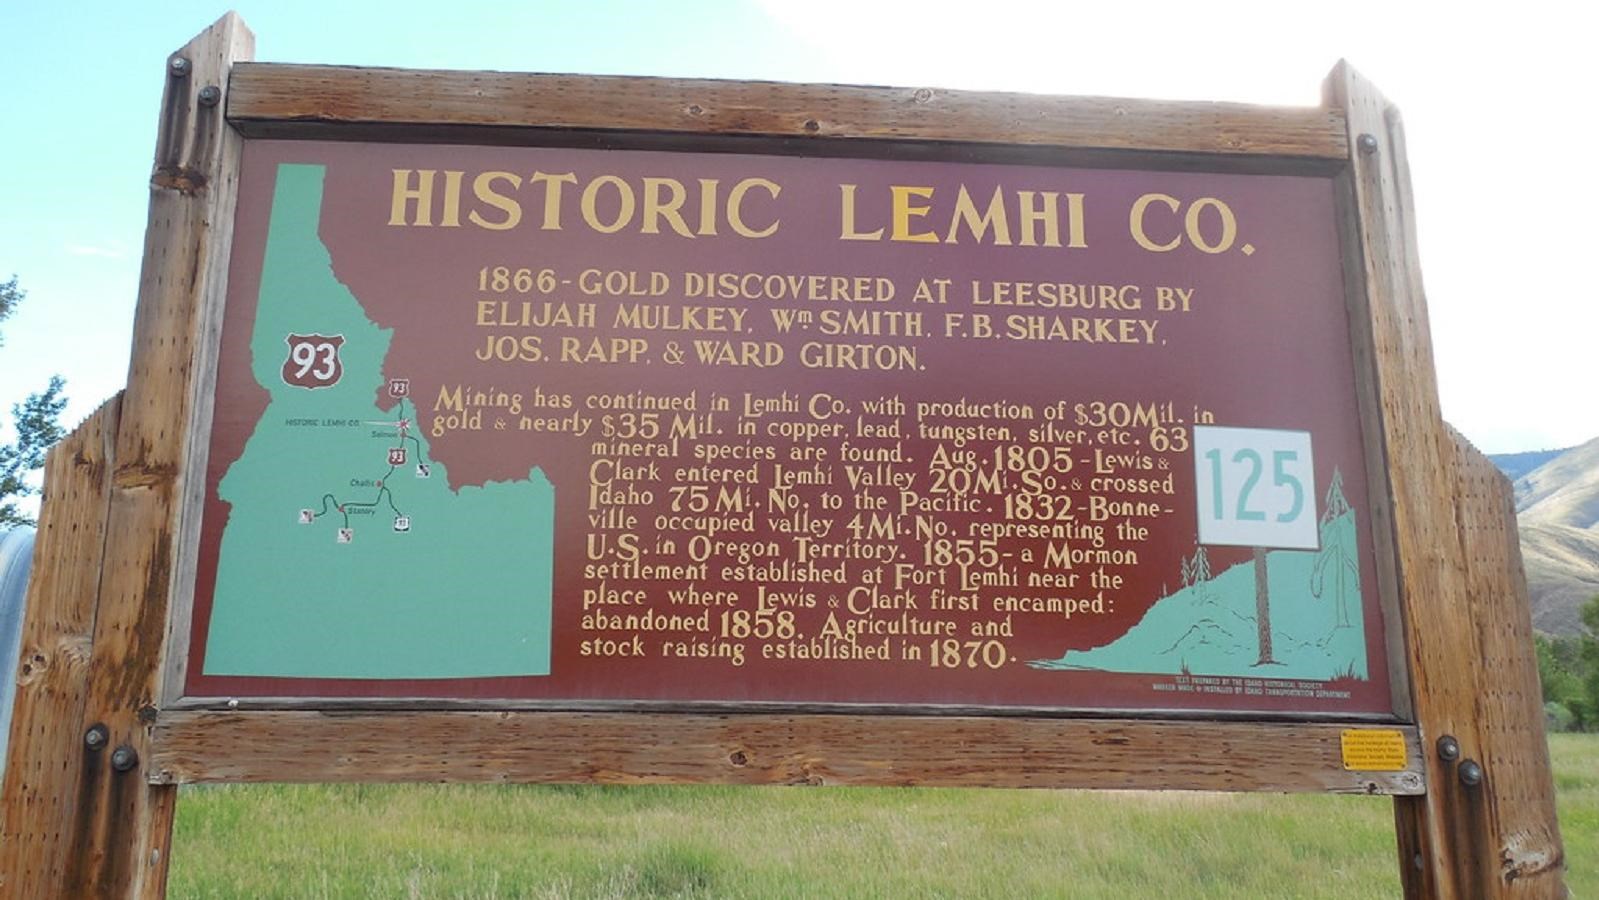 A brown historical marker sign showing a map and important dates for Lemhi County